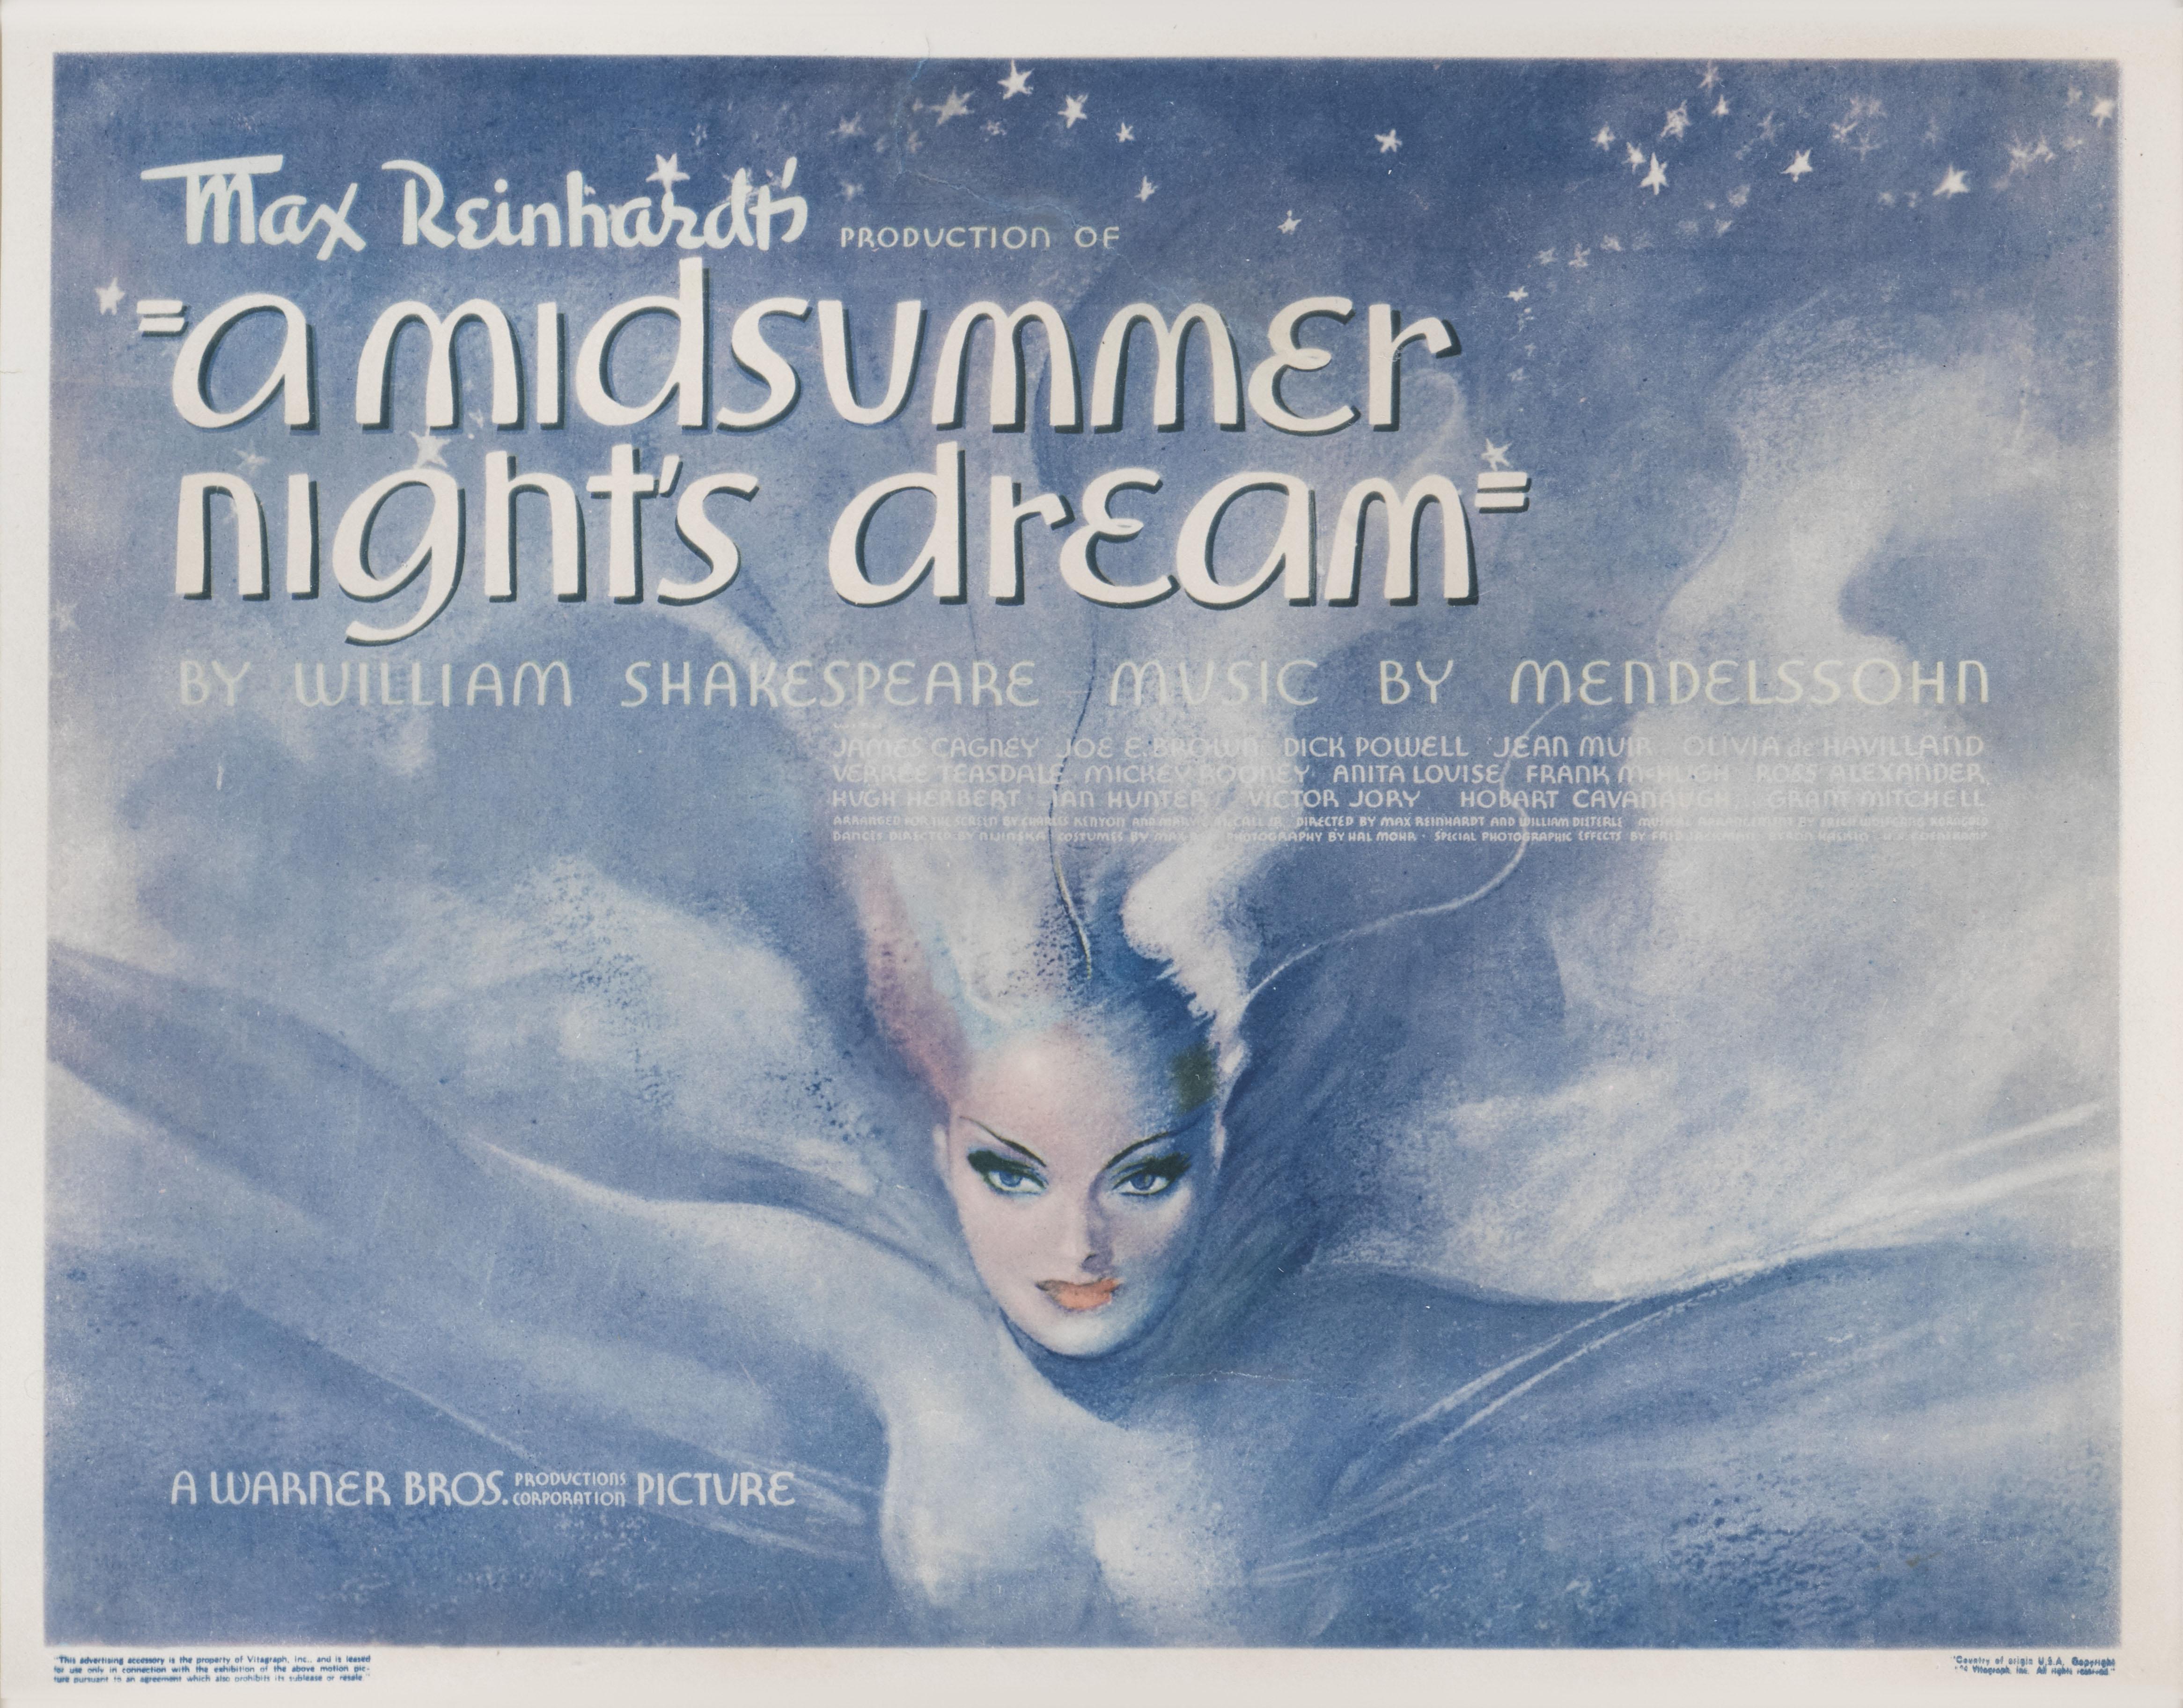 This is an extremely rare and beautiful original US title card  for the 1935 fantasy film A Midsummer Night's Dream.
This film starred James Cagney, Dick Powell and Olivia de Havilland.
The piece is conservation framed with UV plexiglass in a Tulip